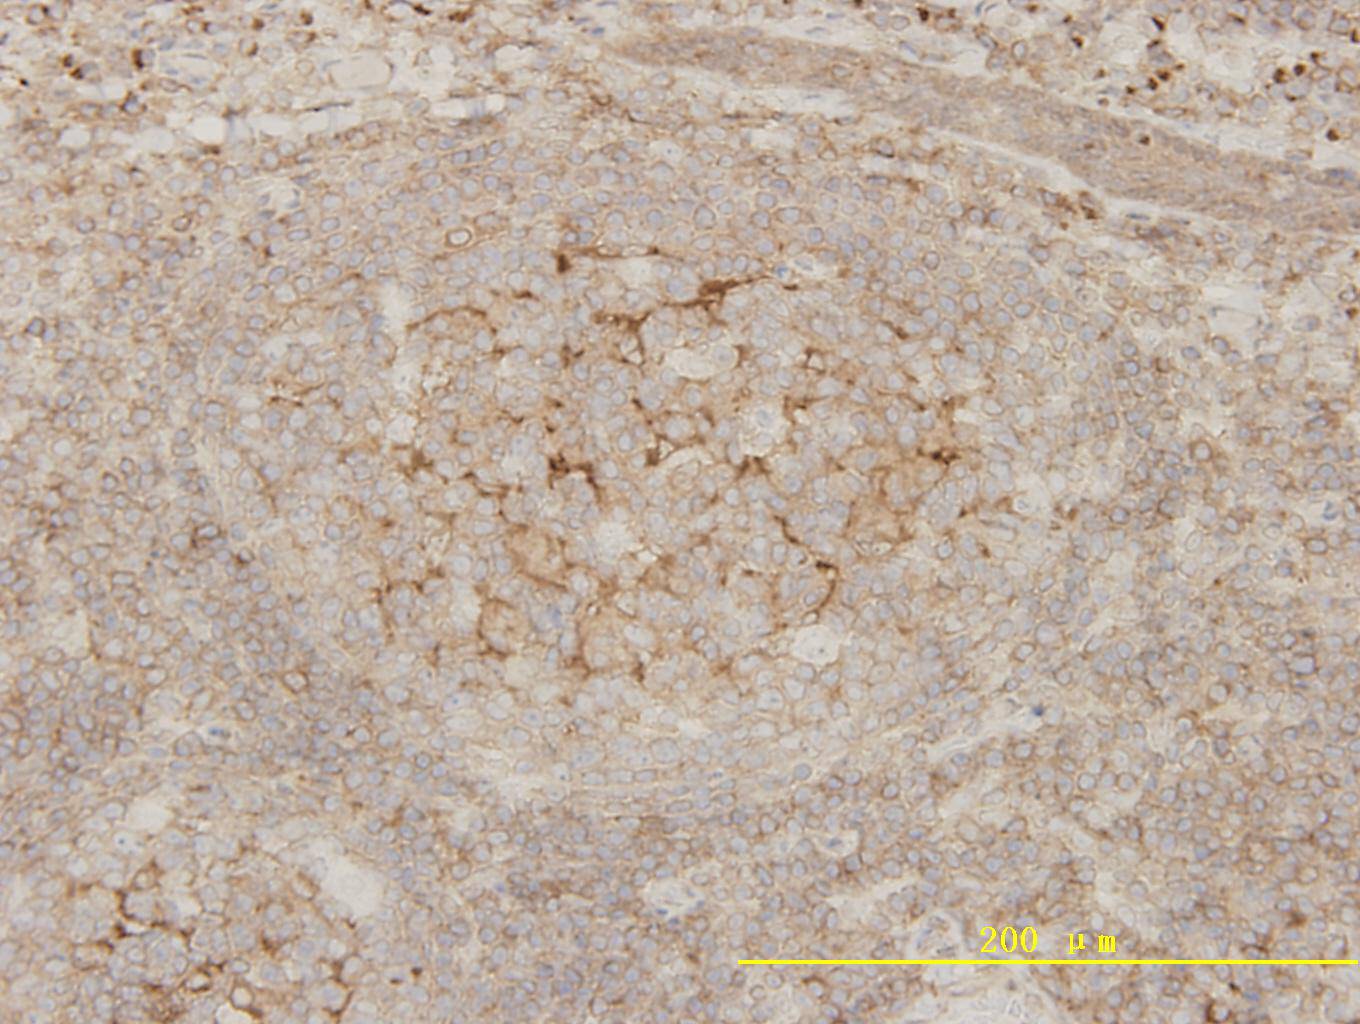 Immunohistochemical analysis of paraffin-embedded human tonsil tissue using anti-Bcl-2 rabbit polyclonal antibody. Counter stained with hematoxylin.